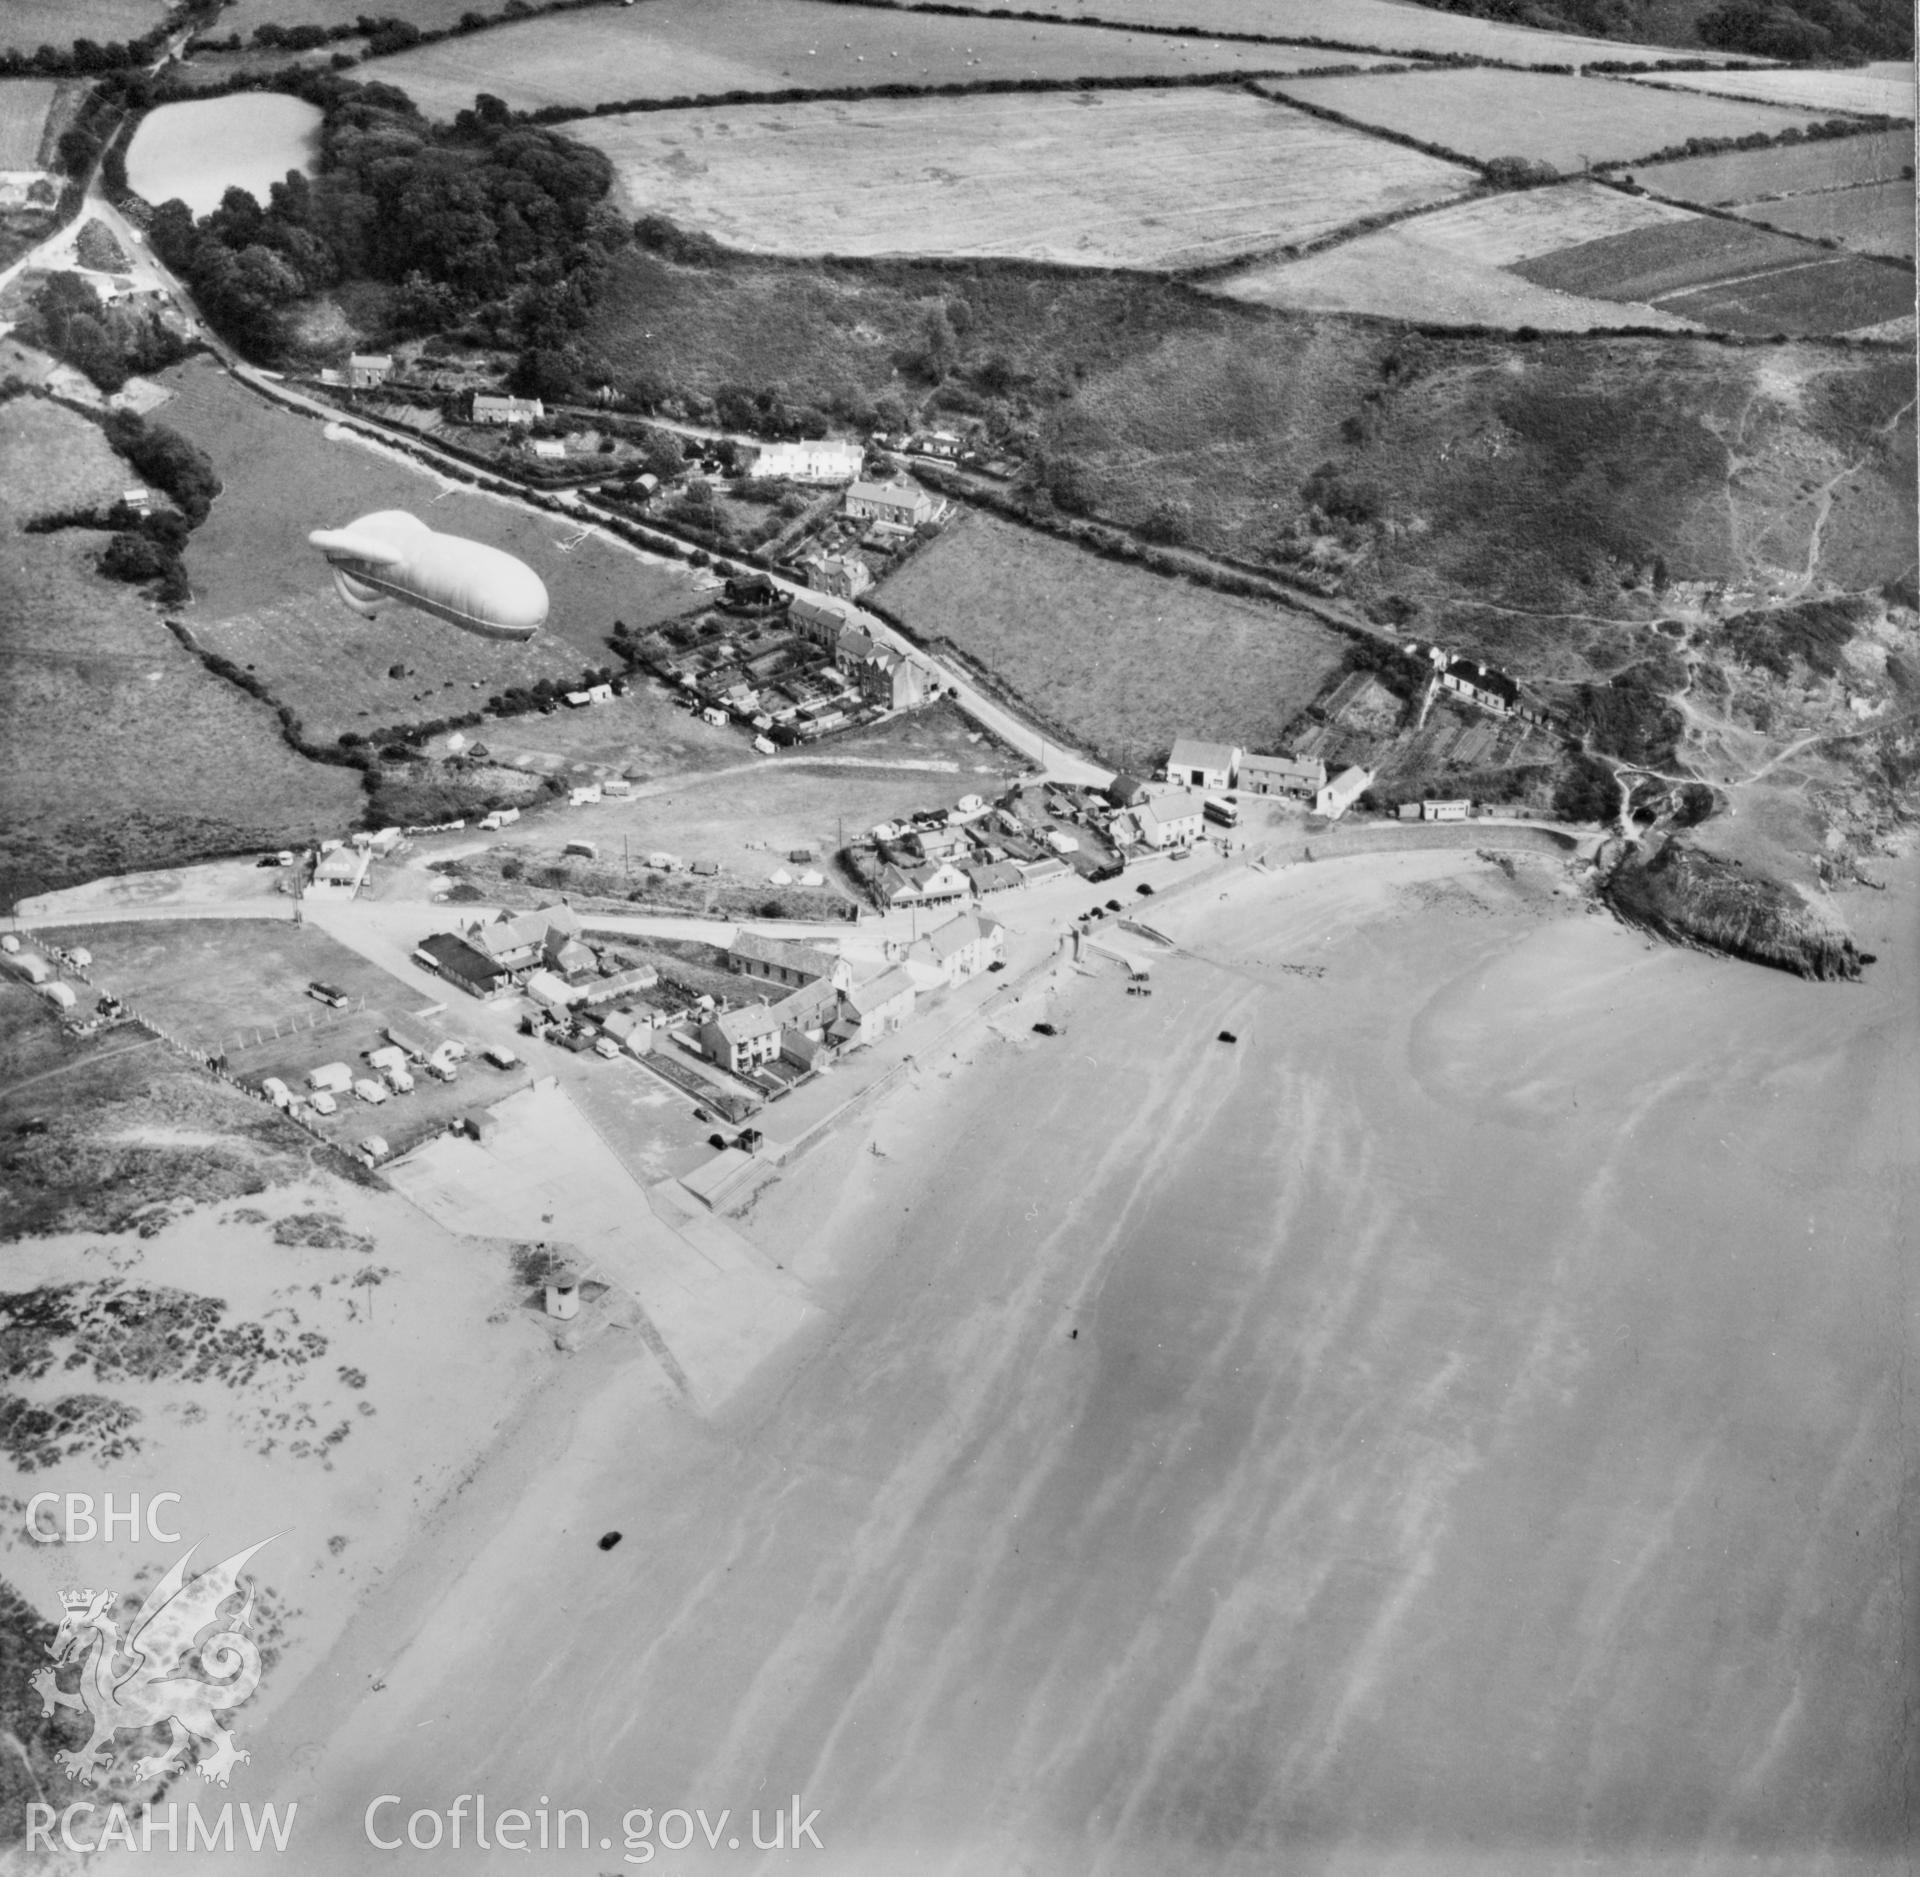 View of Pendine showing caravans, cars and a barrage balloon (reversed). Oblique aerial photograph, 5?" cut roll film.